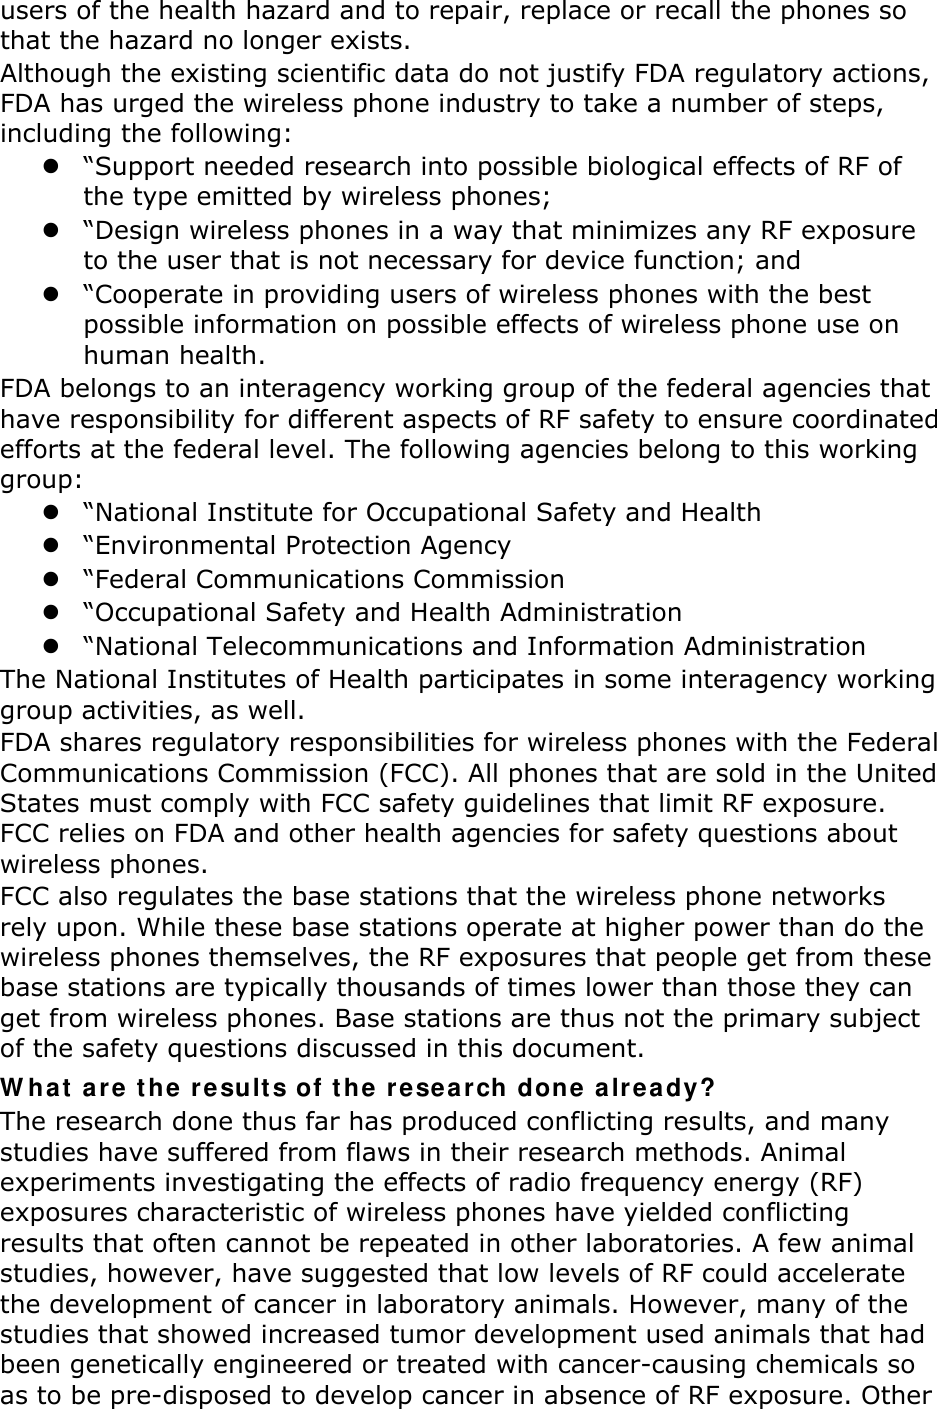 users of the health hazard and to repair, replace or recall the phones so that the hazard no longer exists. Although the existing scientific data do not justify FDA regulatory actions, FDA has urged the wireless phone industry to take a number of steps, including the following: z “Support needed research into possible biological effects of RF of the type emitted by wireless phones; z “Design wireless phones in a way that minimizes any RF exposure to the user that is not necessary for device function; and z “Cooperate in providing users of wireless phones with the best possible information on possible effects of wireless phone use on human health. FDA belongs to an interagency working group of the federal agencies that have responsibility for different aspects of RF safety to ensure coordinated efforts at the federal level. The following agencies belong to this working group: z “National Institute for Occupational Safety and Health z “Environmental Protection Agency z “Federal Communications Commission z “Occupational Safety and Health Administration z “National Telecommunications and Information Administration The National Institutes of Health participates in some interagency working group activities, as well. FDA shares regulatory responsibilities for wireless phones with the Federal Communications Commission (FCC). All phones that are sold in the United States must comply with FCC safety guidelines that limit RF exposure. FCC relies on FDA and other health agencies for safety questions about wireless phones. FCC also regulates the base stations that the wireless phone networks rely upon. While these base stations operate at higher power than do the wireless phones themselves, the RF exposures that people get from these base stations are typically thousands of times lower than those they can get from wireless phones. Base stations are thus not the primary subject of the safety questions discussed in this document. What are the results of the research done already? The research done thus far has produced conflicting results, and many studies have suffered from flaws in their research methods. Animal experiments investigating the effects of radio frequency energy (RF) exposures characteristic of wireless phones have yielded conflicting results that often cannot be repeated in other laboratories. A few animal studies, however, have suggested that low levels of RF could accelerate the development of cancer in laboratory animals. However, many of the studies that showed increased tumor development used animals that had been genetically engineered or treated with cancer-causing chemicals so as to be pre-disposed to develop cancer in absence of RF exposure. Other 